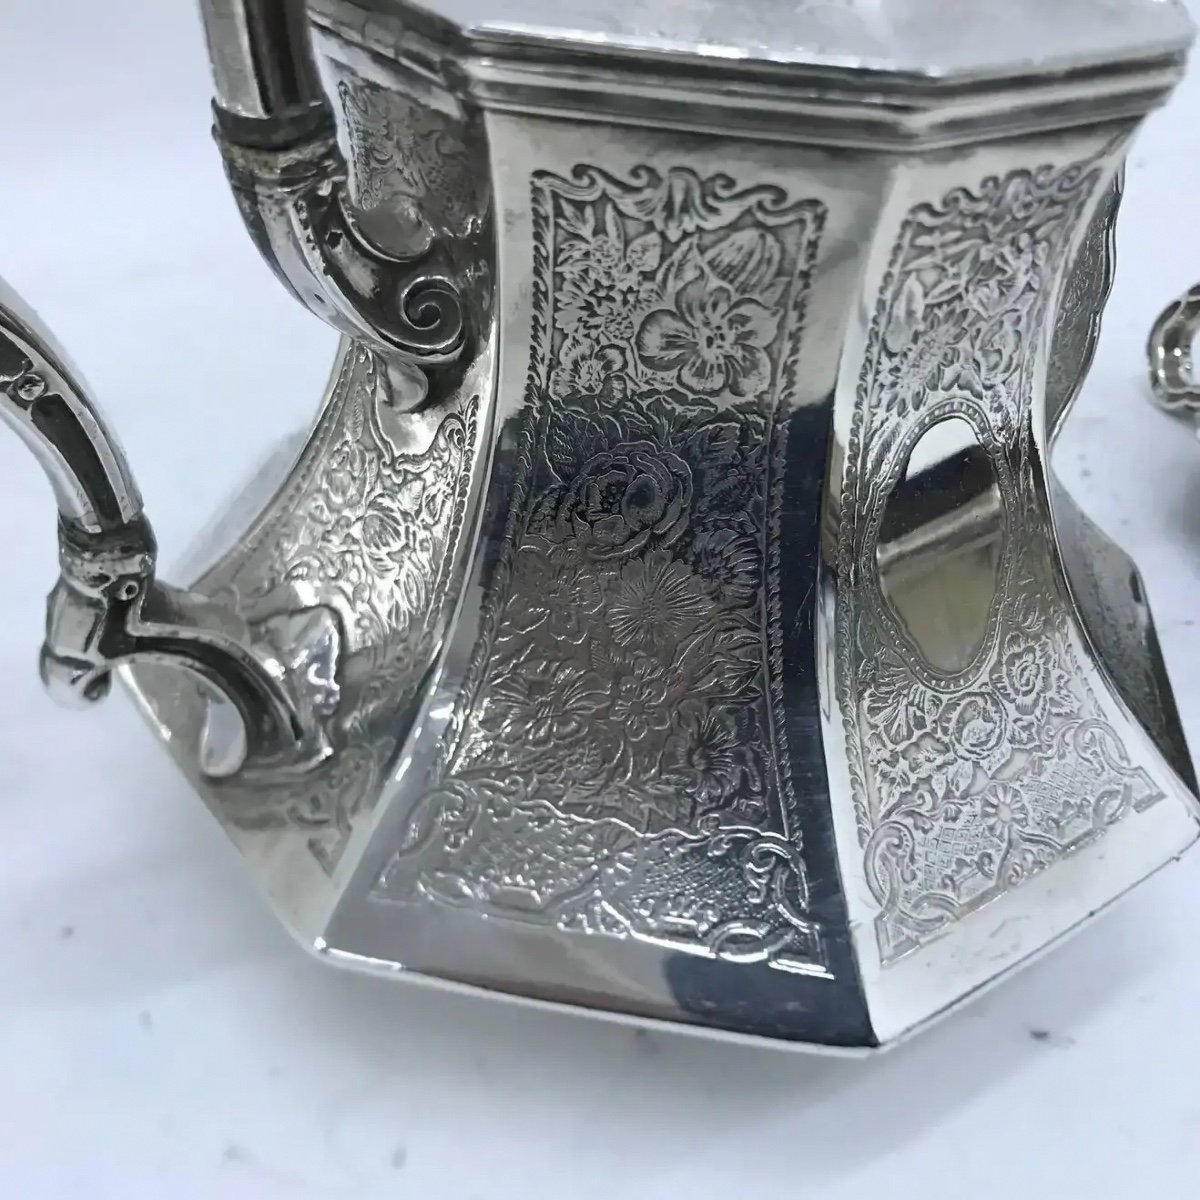 1890 Skinner & Co. Art Nouveau English Tea Service In Engraved Silver Plate - 4 Pieces-photo-2